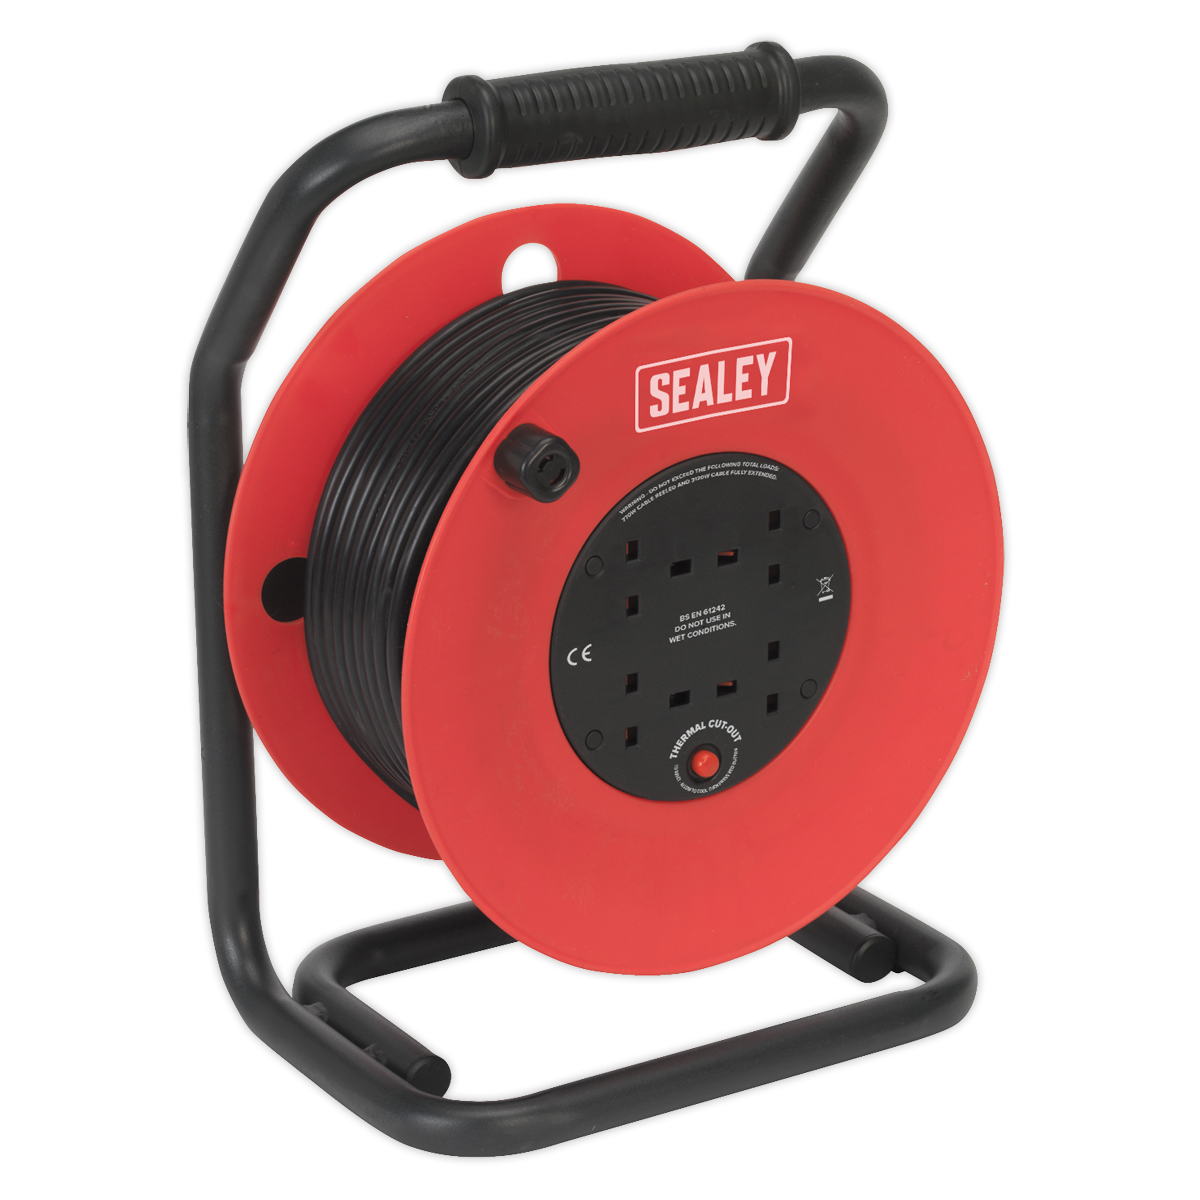 Sealey Cable Reel 50m 4 x 230V 1.5mm² Heavy-Duty Thermal Trip